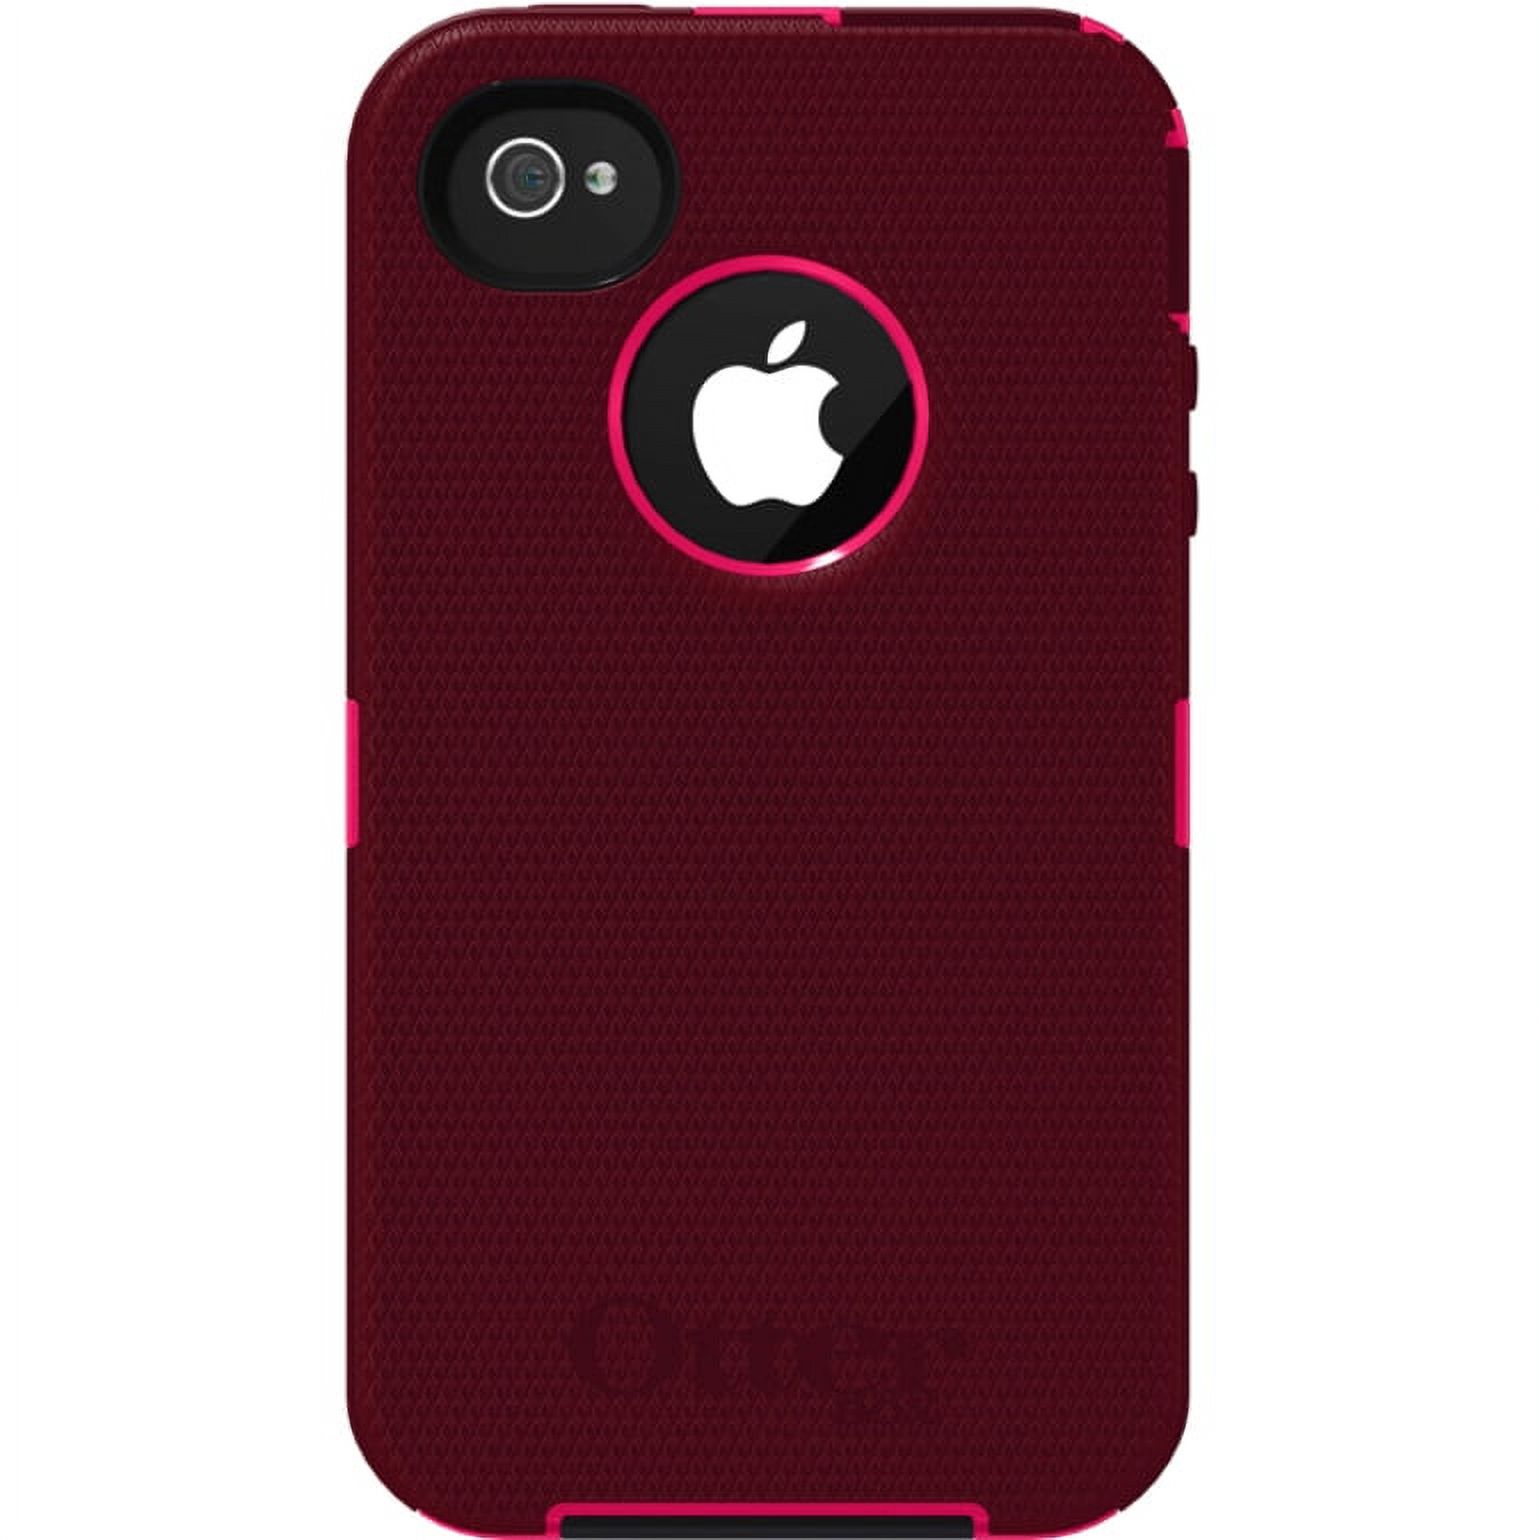 OtterBox Defender Rugged Carrying Case (Holster) Apple iPhone 4S, iPhone 4 Smartphone, Deep Plum, Peony Pink - image 4 of 5